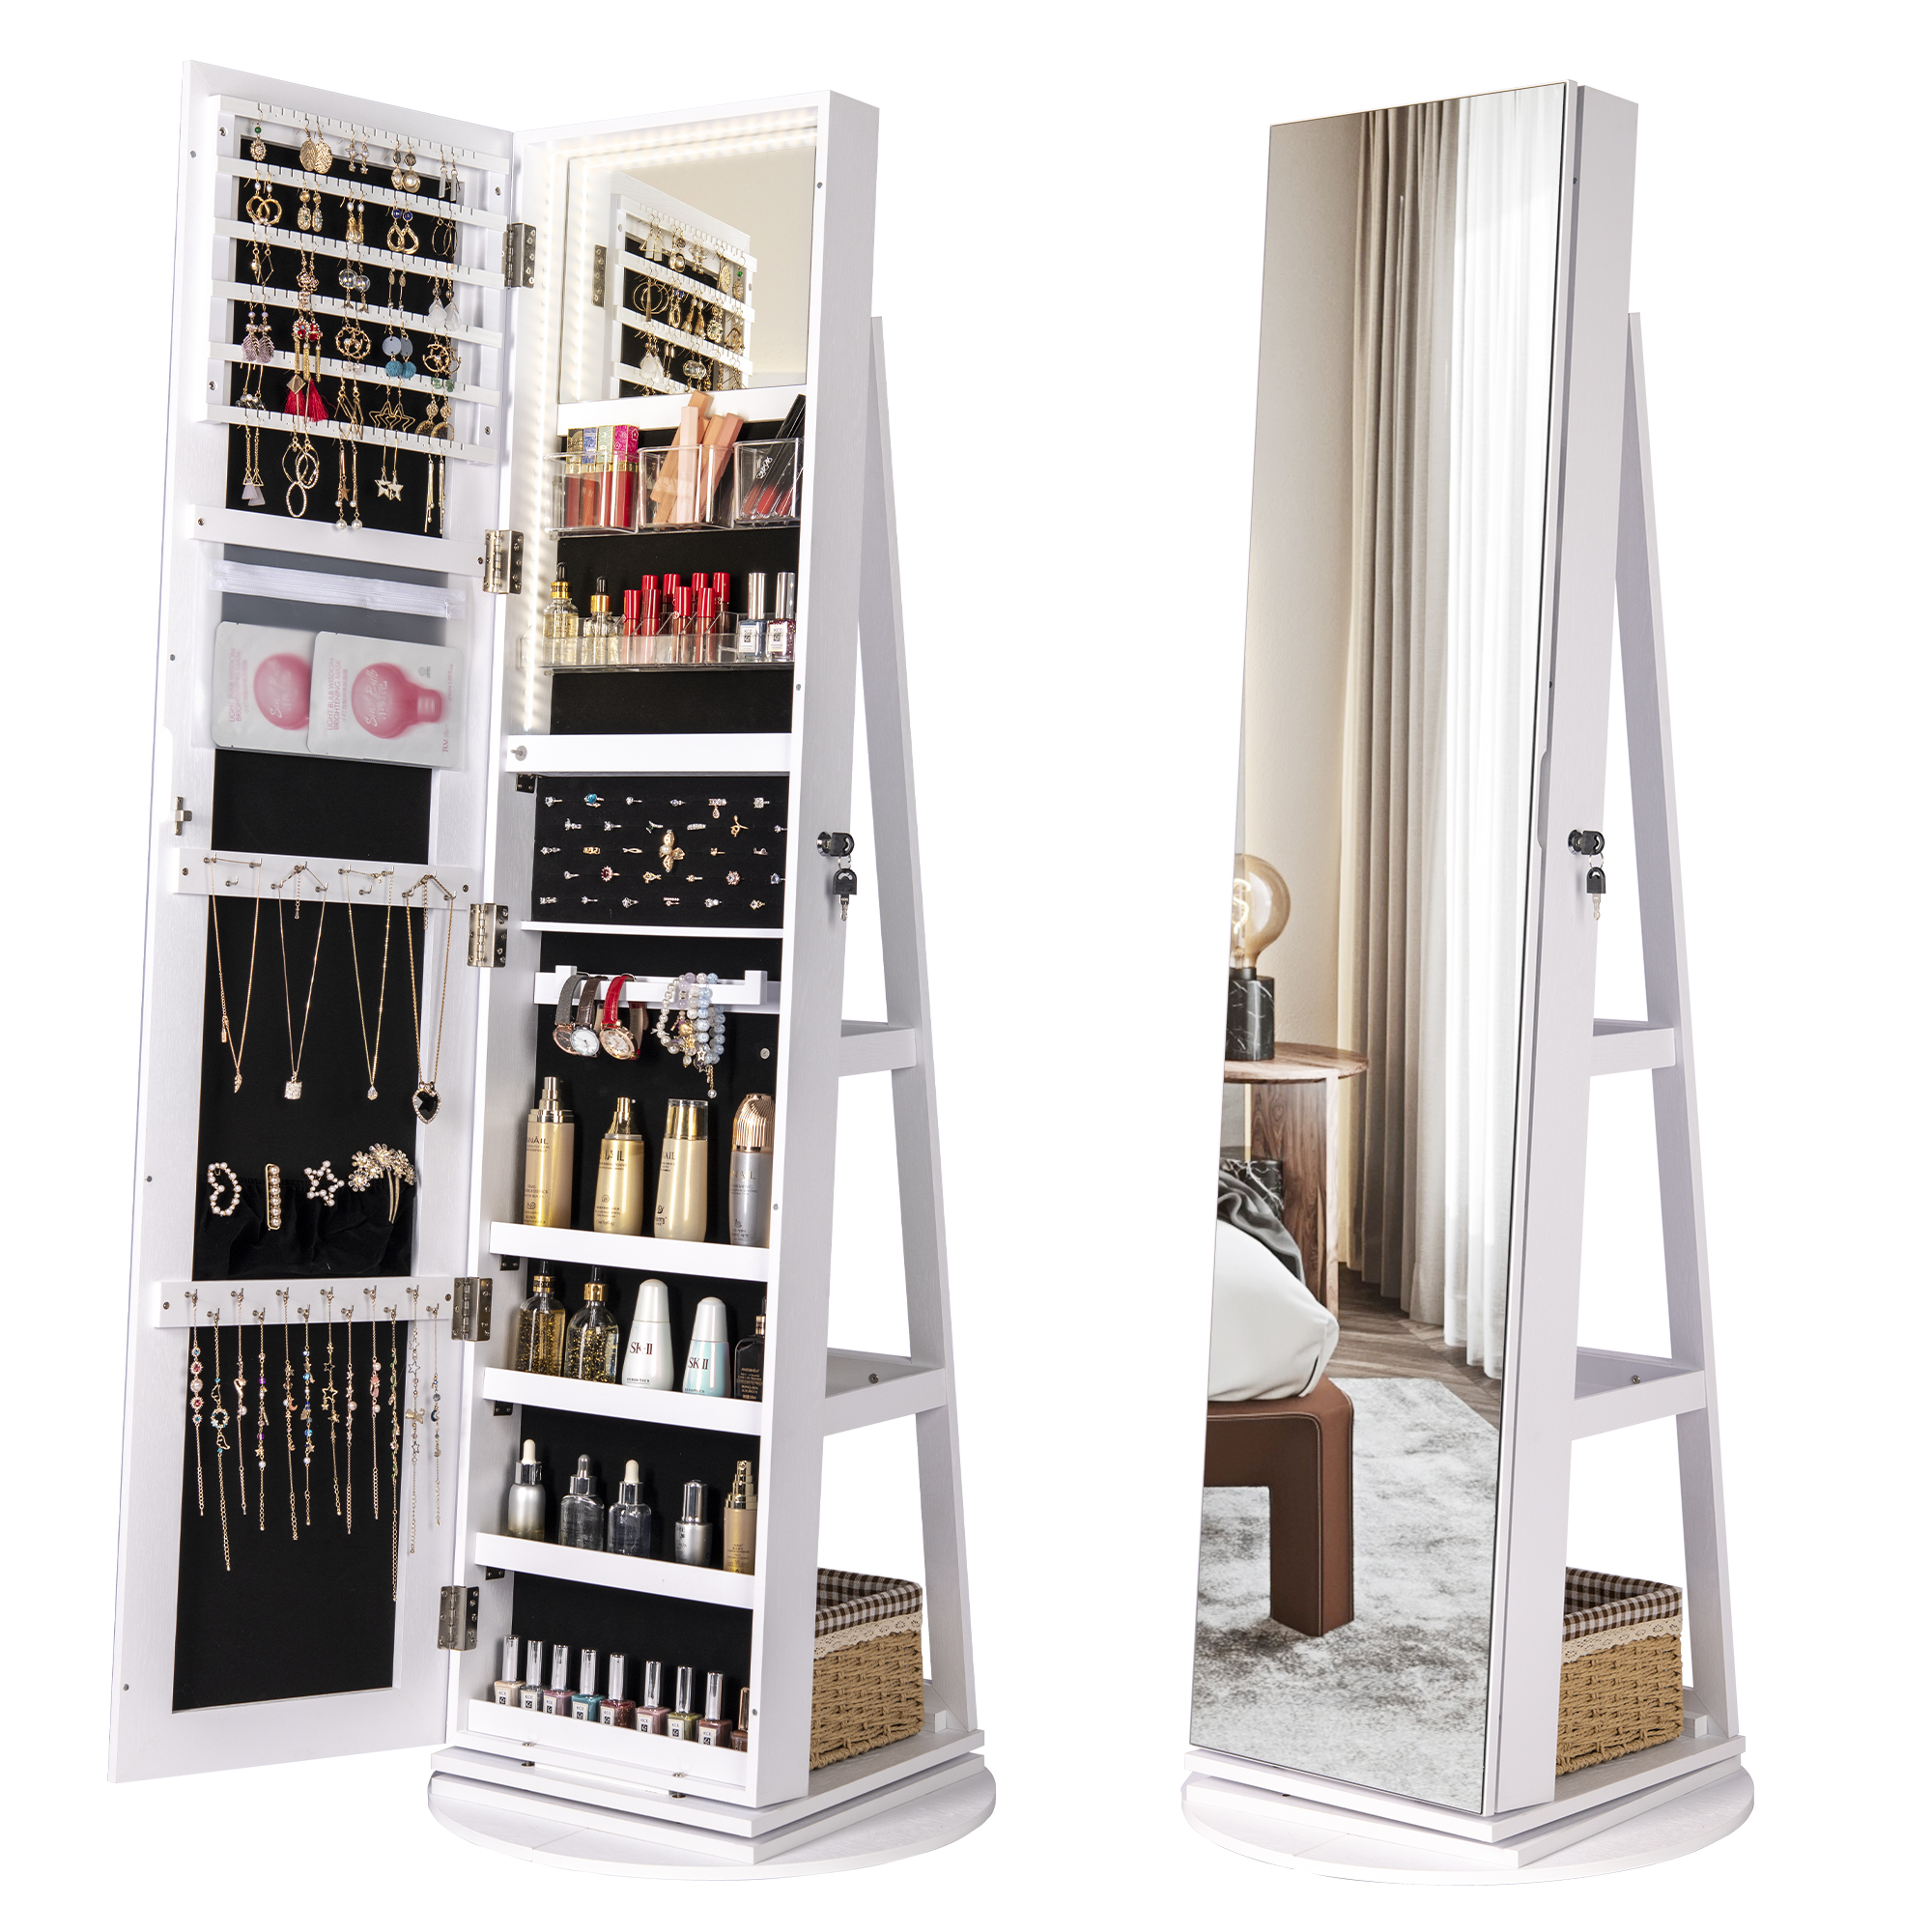 Coat Rack White Free Standing Floor Mirror W/ Storage Cabinet LVSOMT 360° Rotating Jewelry Armoire with Full-Length Mirror Large Capacity Jewelry Organizer Cabinet Hanger Rod Shelves